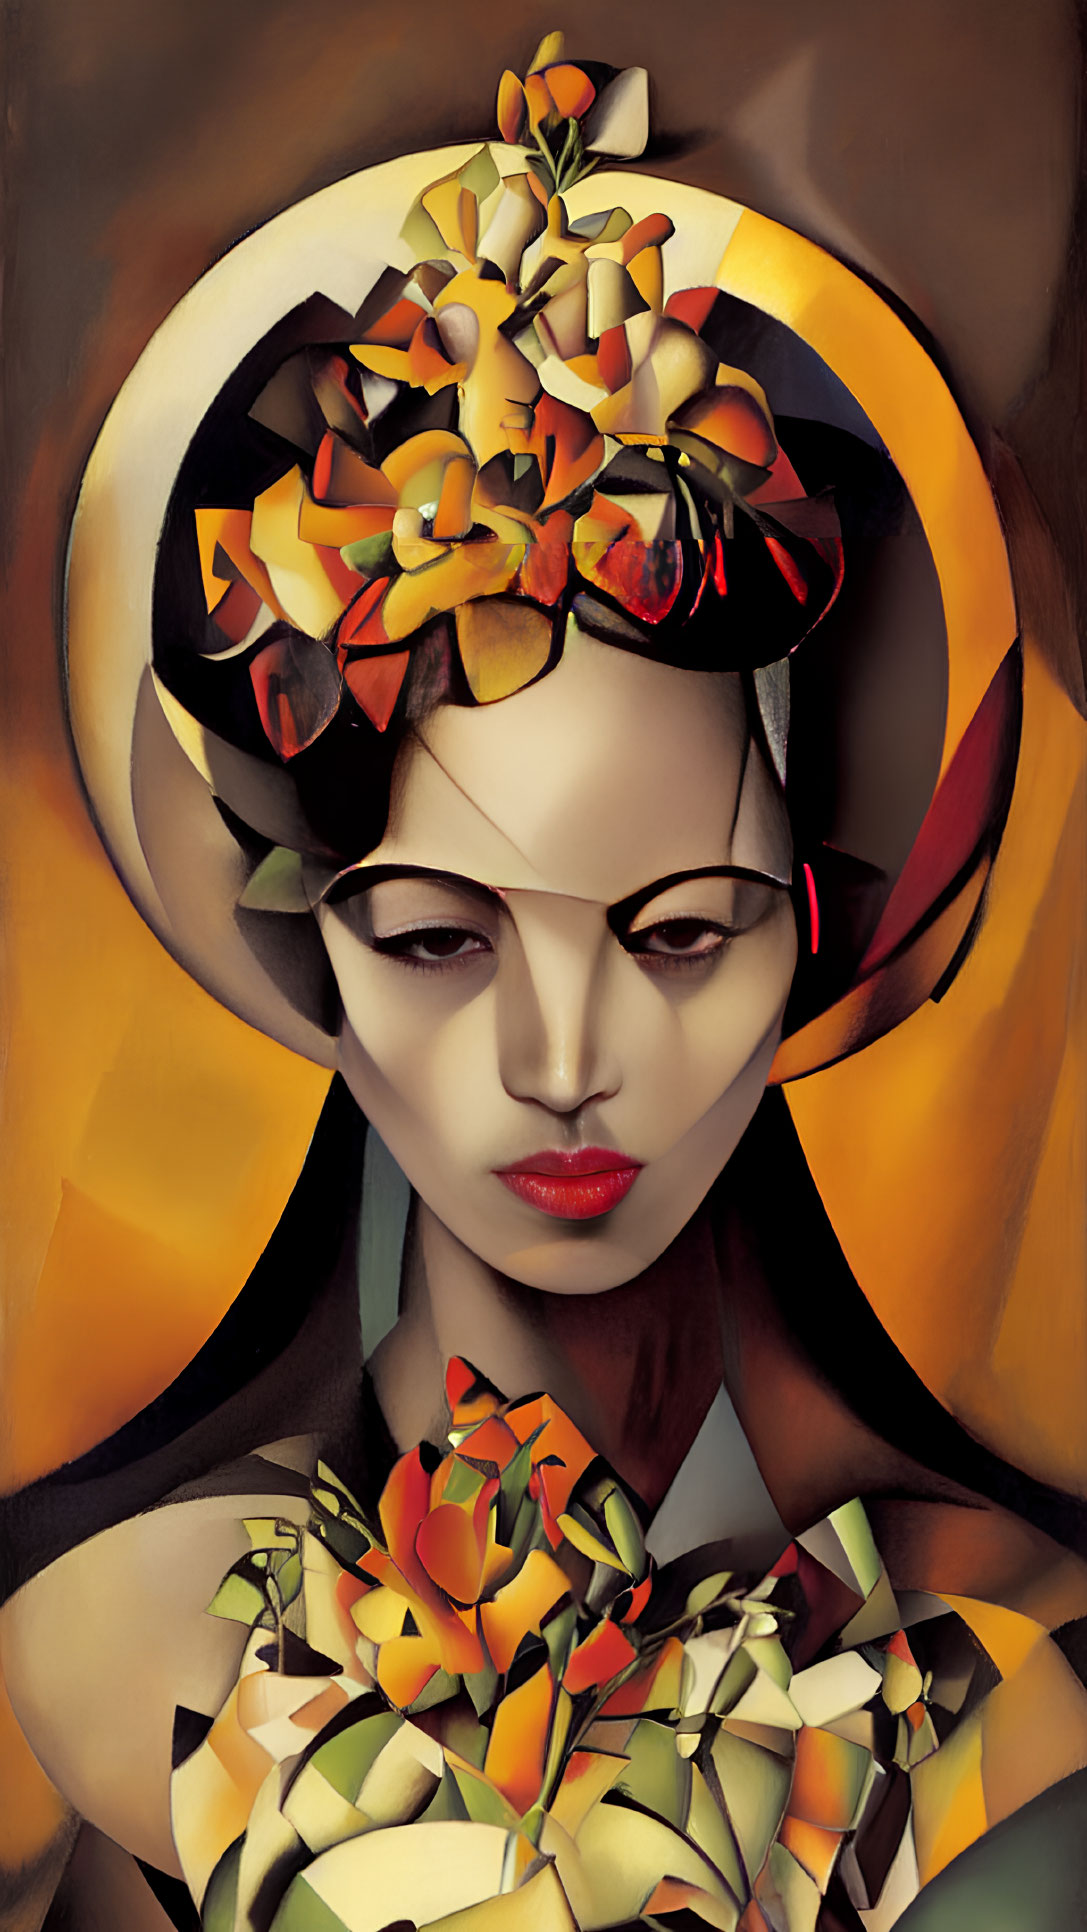 Exaggerated features portrait with orange florals on dark background